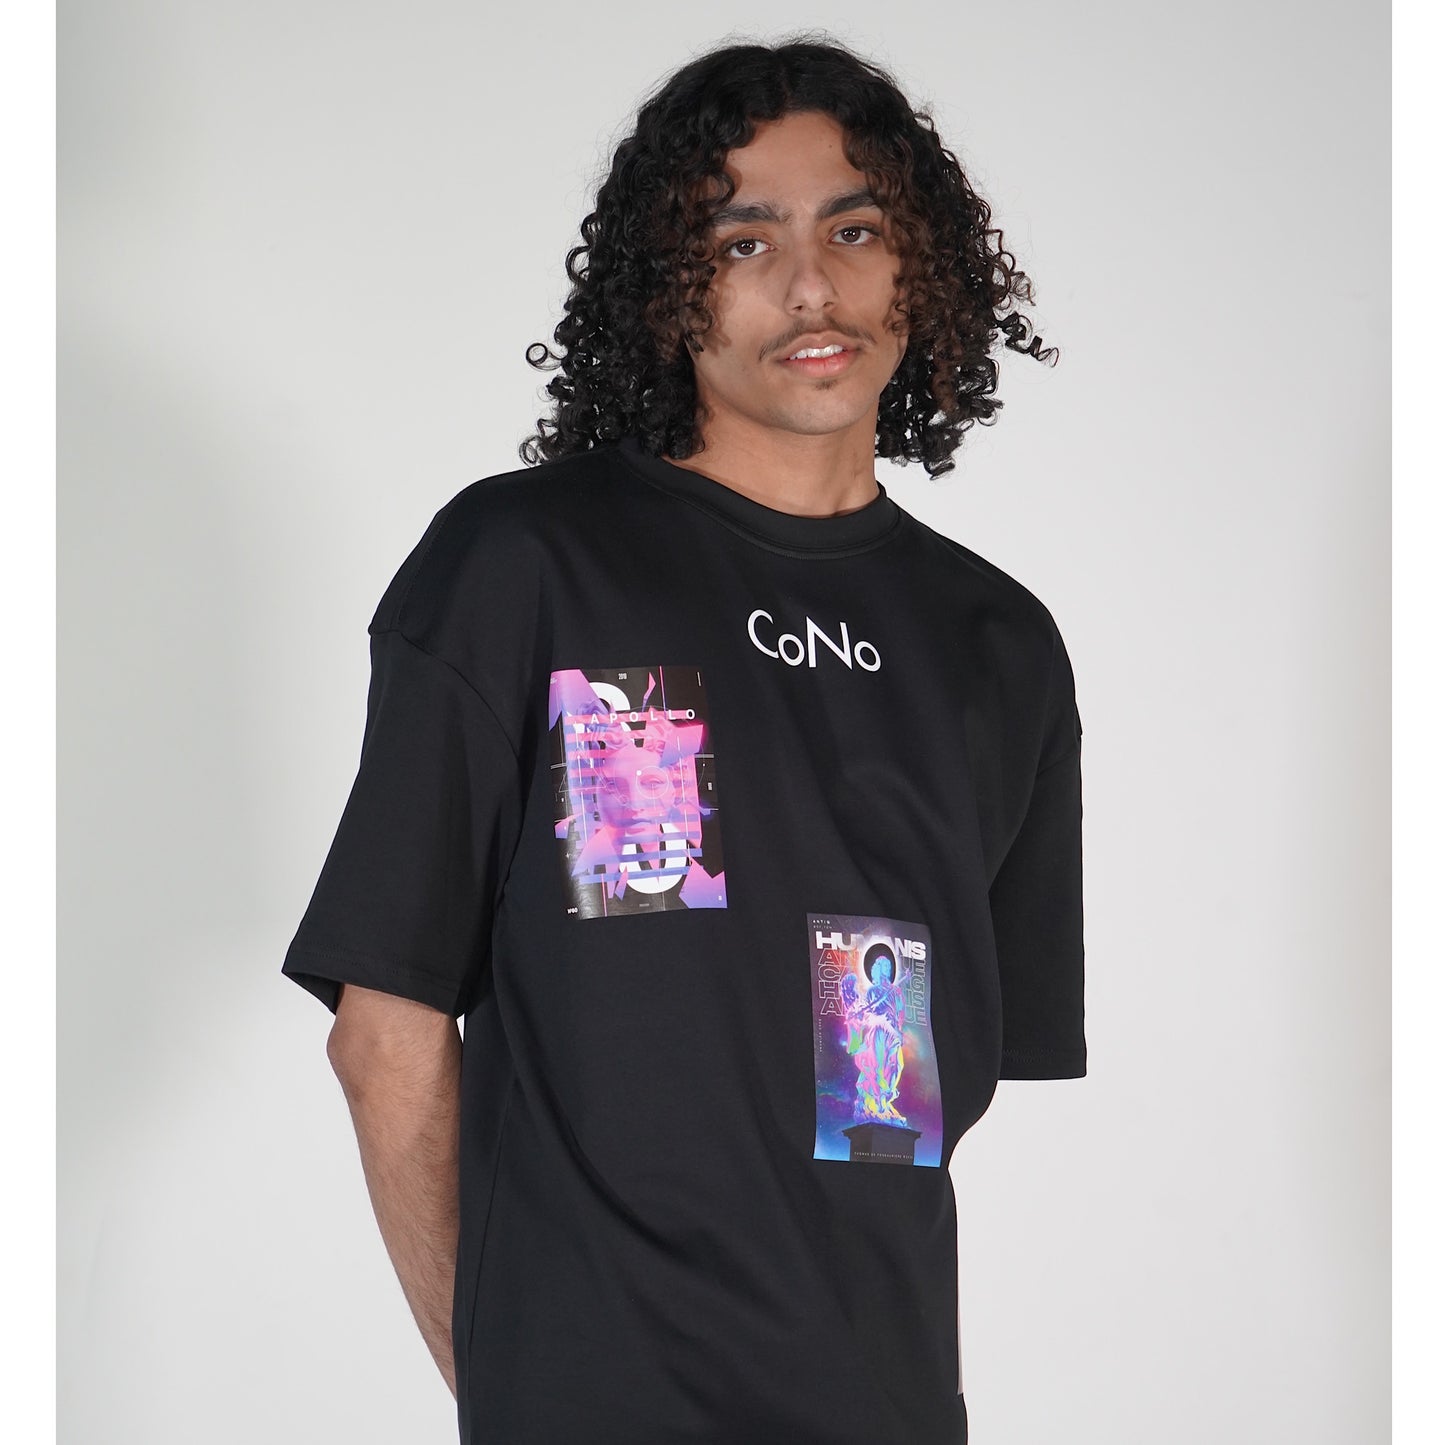 A person with curly hair facing left, showcasing a black t-shirt with a colorful graphic design on the front.